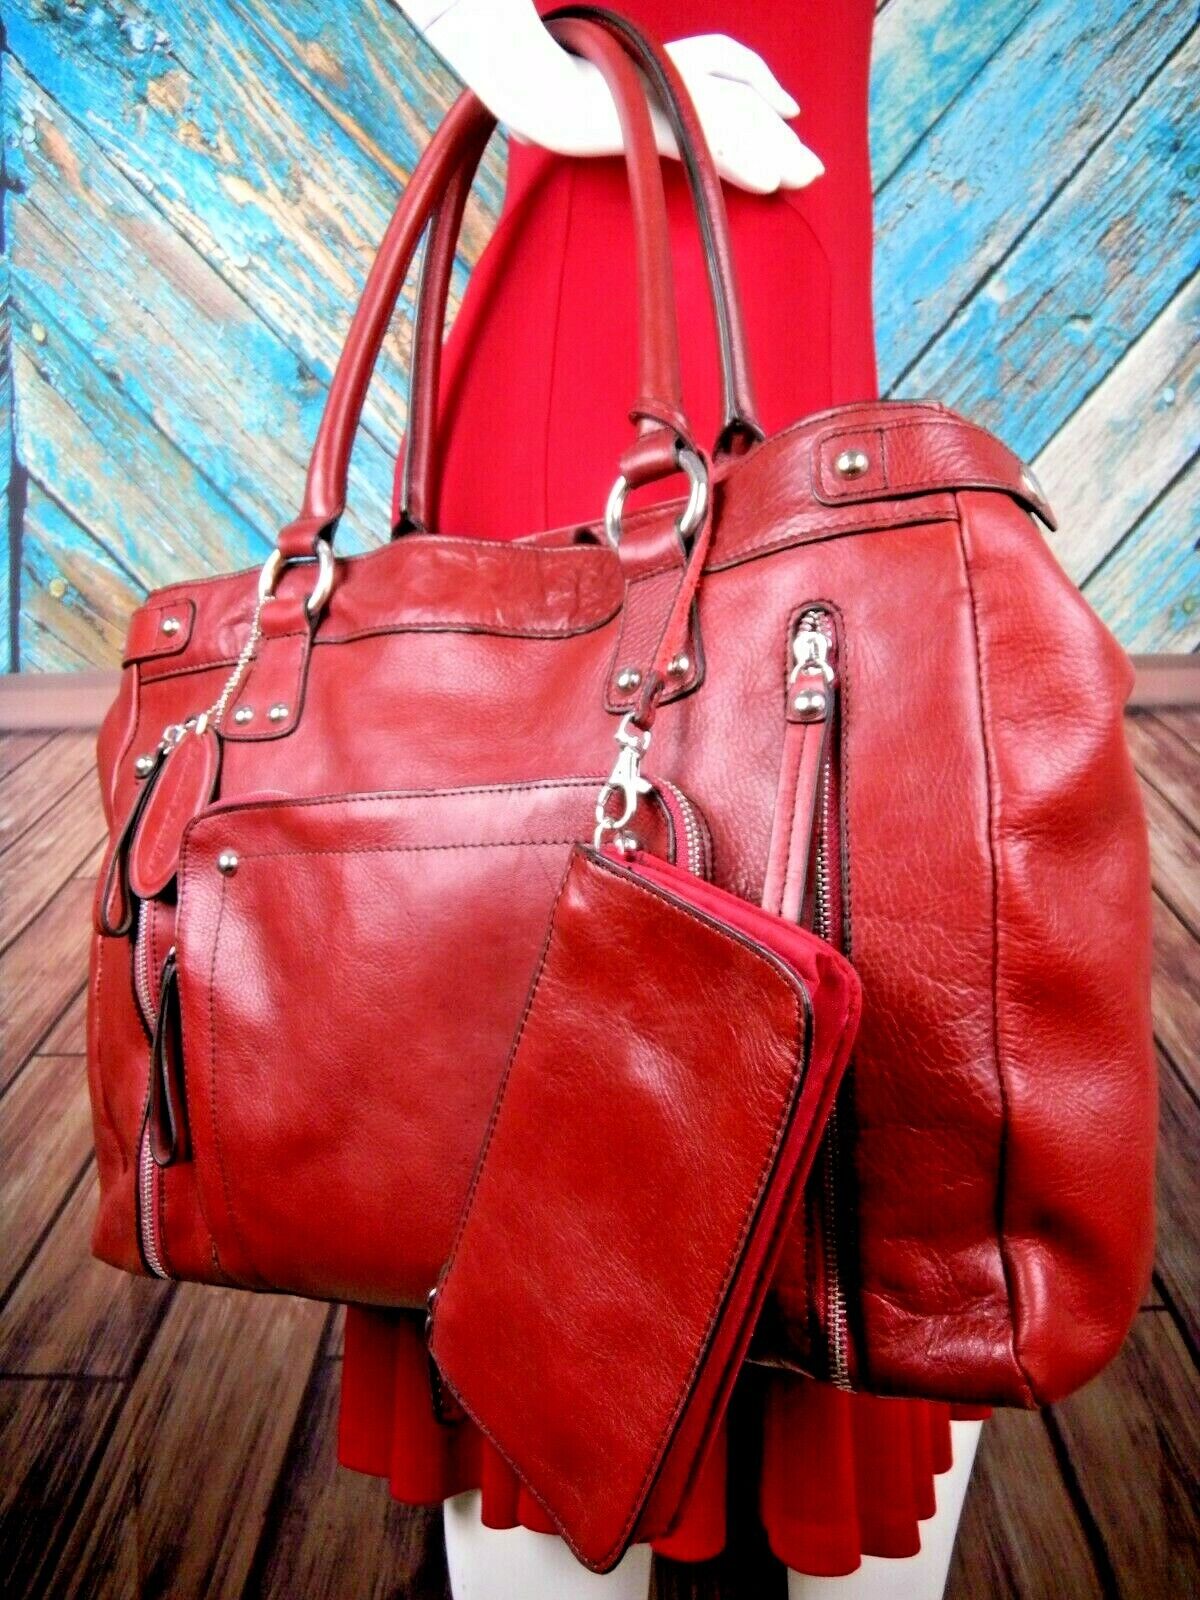 WILSON'S LEATHER WOMEN'S BURNT RED LEATHER LAPTOP BRIEFCASE SHOULDER BAG